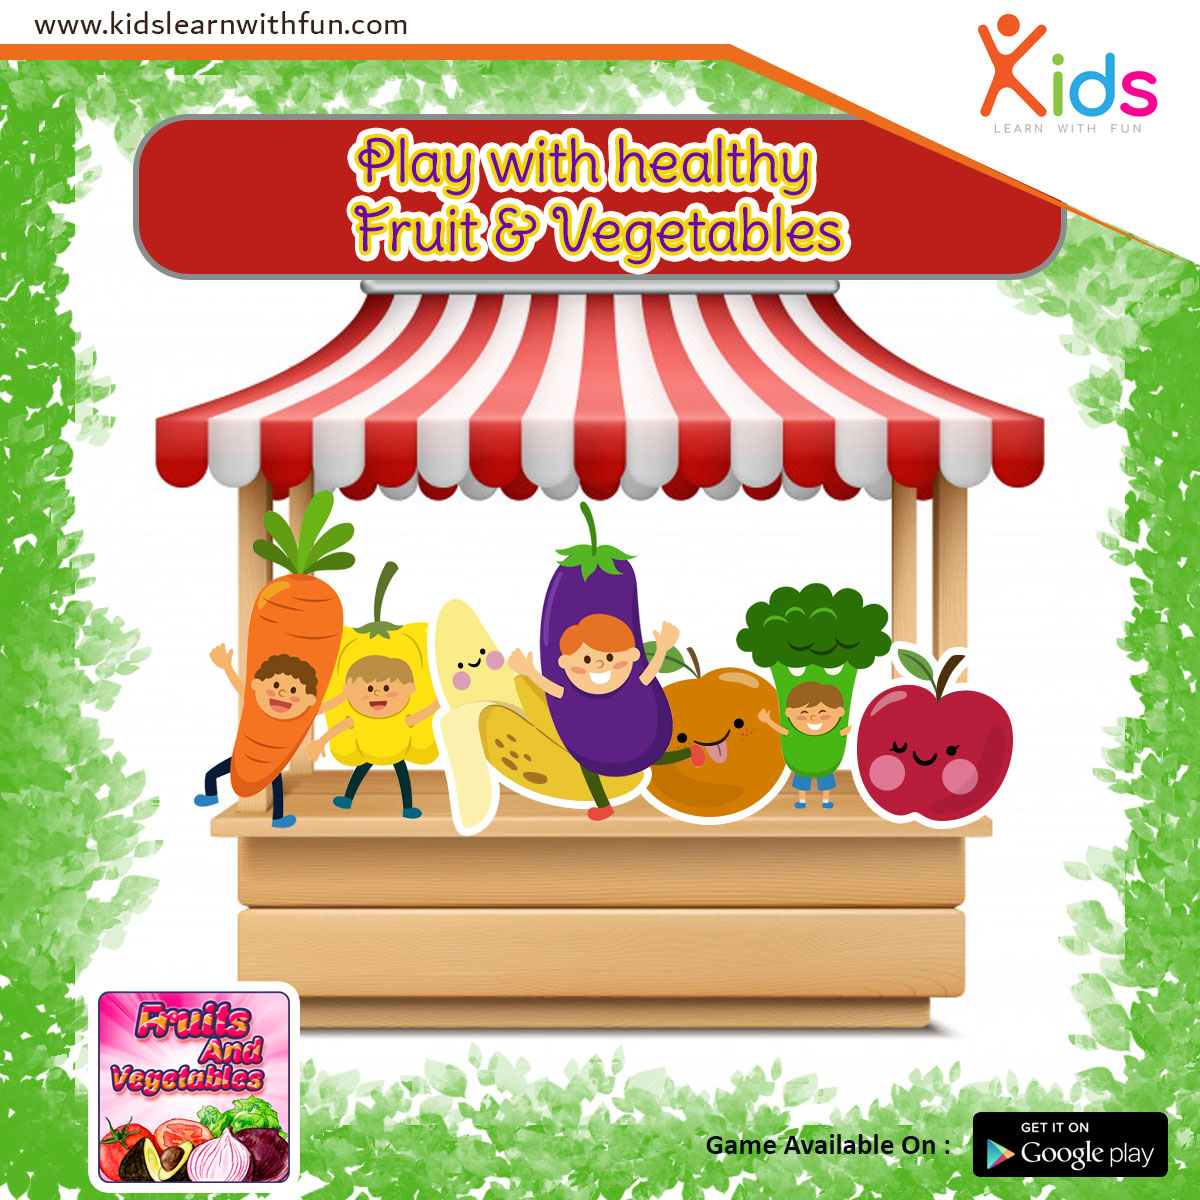 Fruit vegetables learning apps for kids fun games - play.google.com/store/apps/det…
#Play #Eat #Healthy #Fruits #Quarantine #GameTime #PlayTime #Vegetables #fruitsandvegetables #lifestyle #language #fun #FunTime #game #kidsgrowth #development #puzzle #Recognize